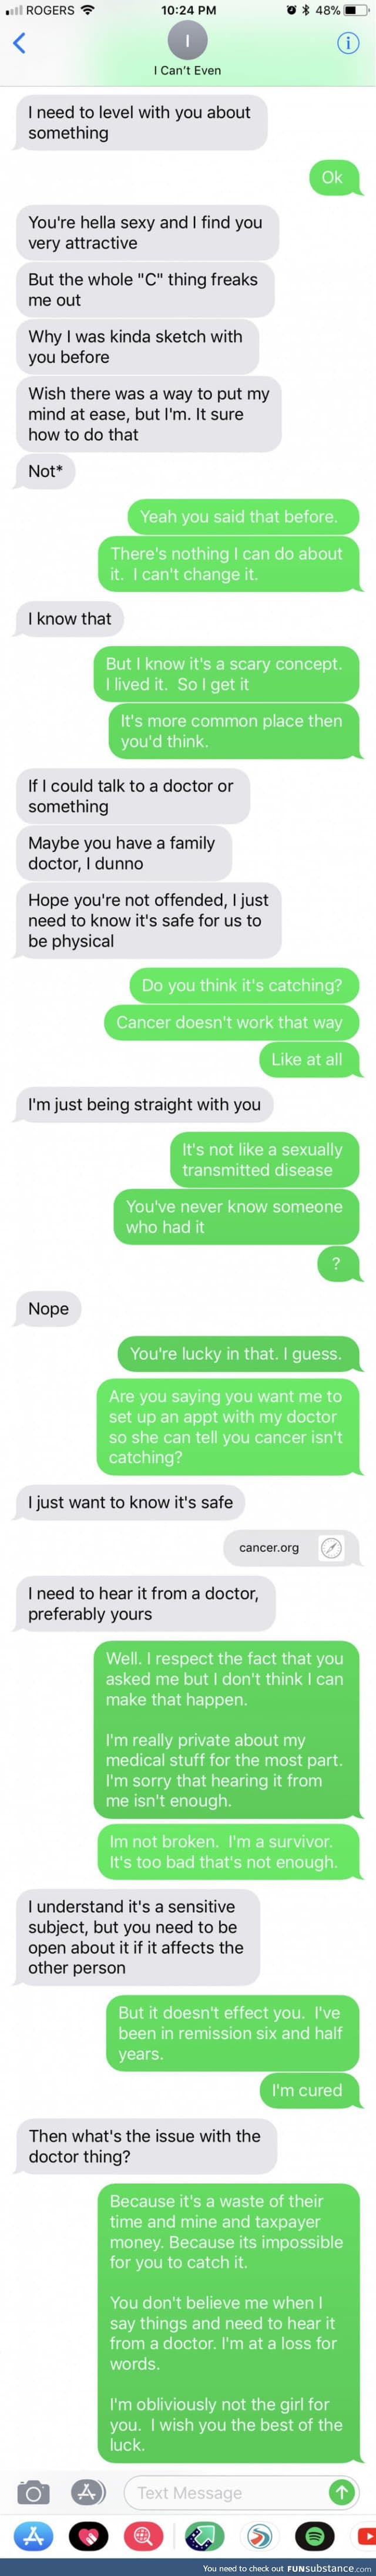 Woman shares texts from man who thought her cancer was contagious